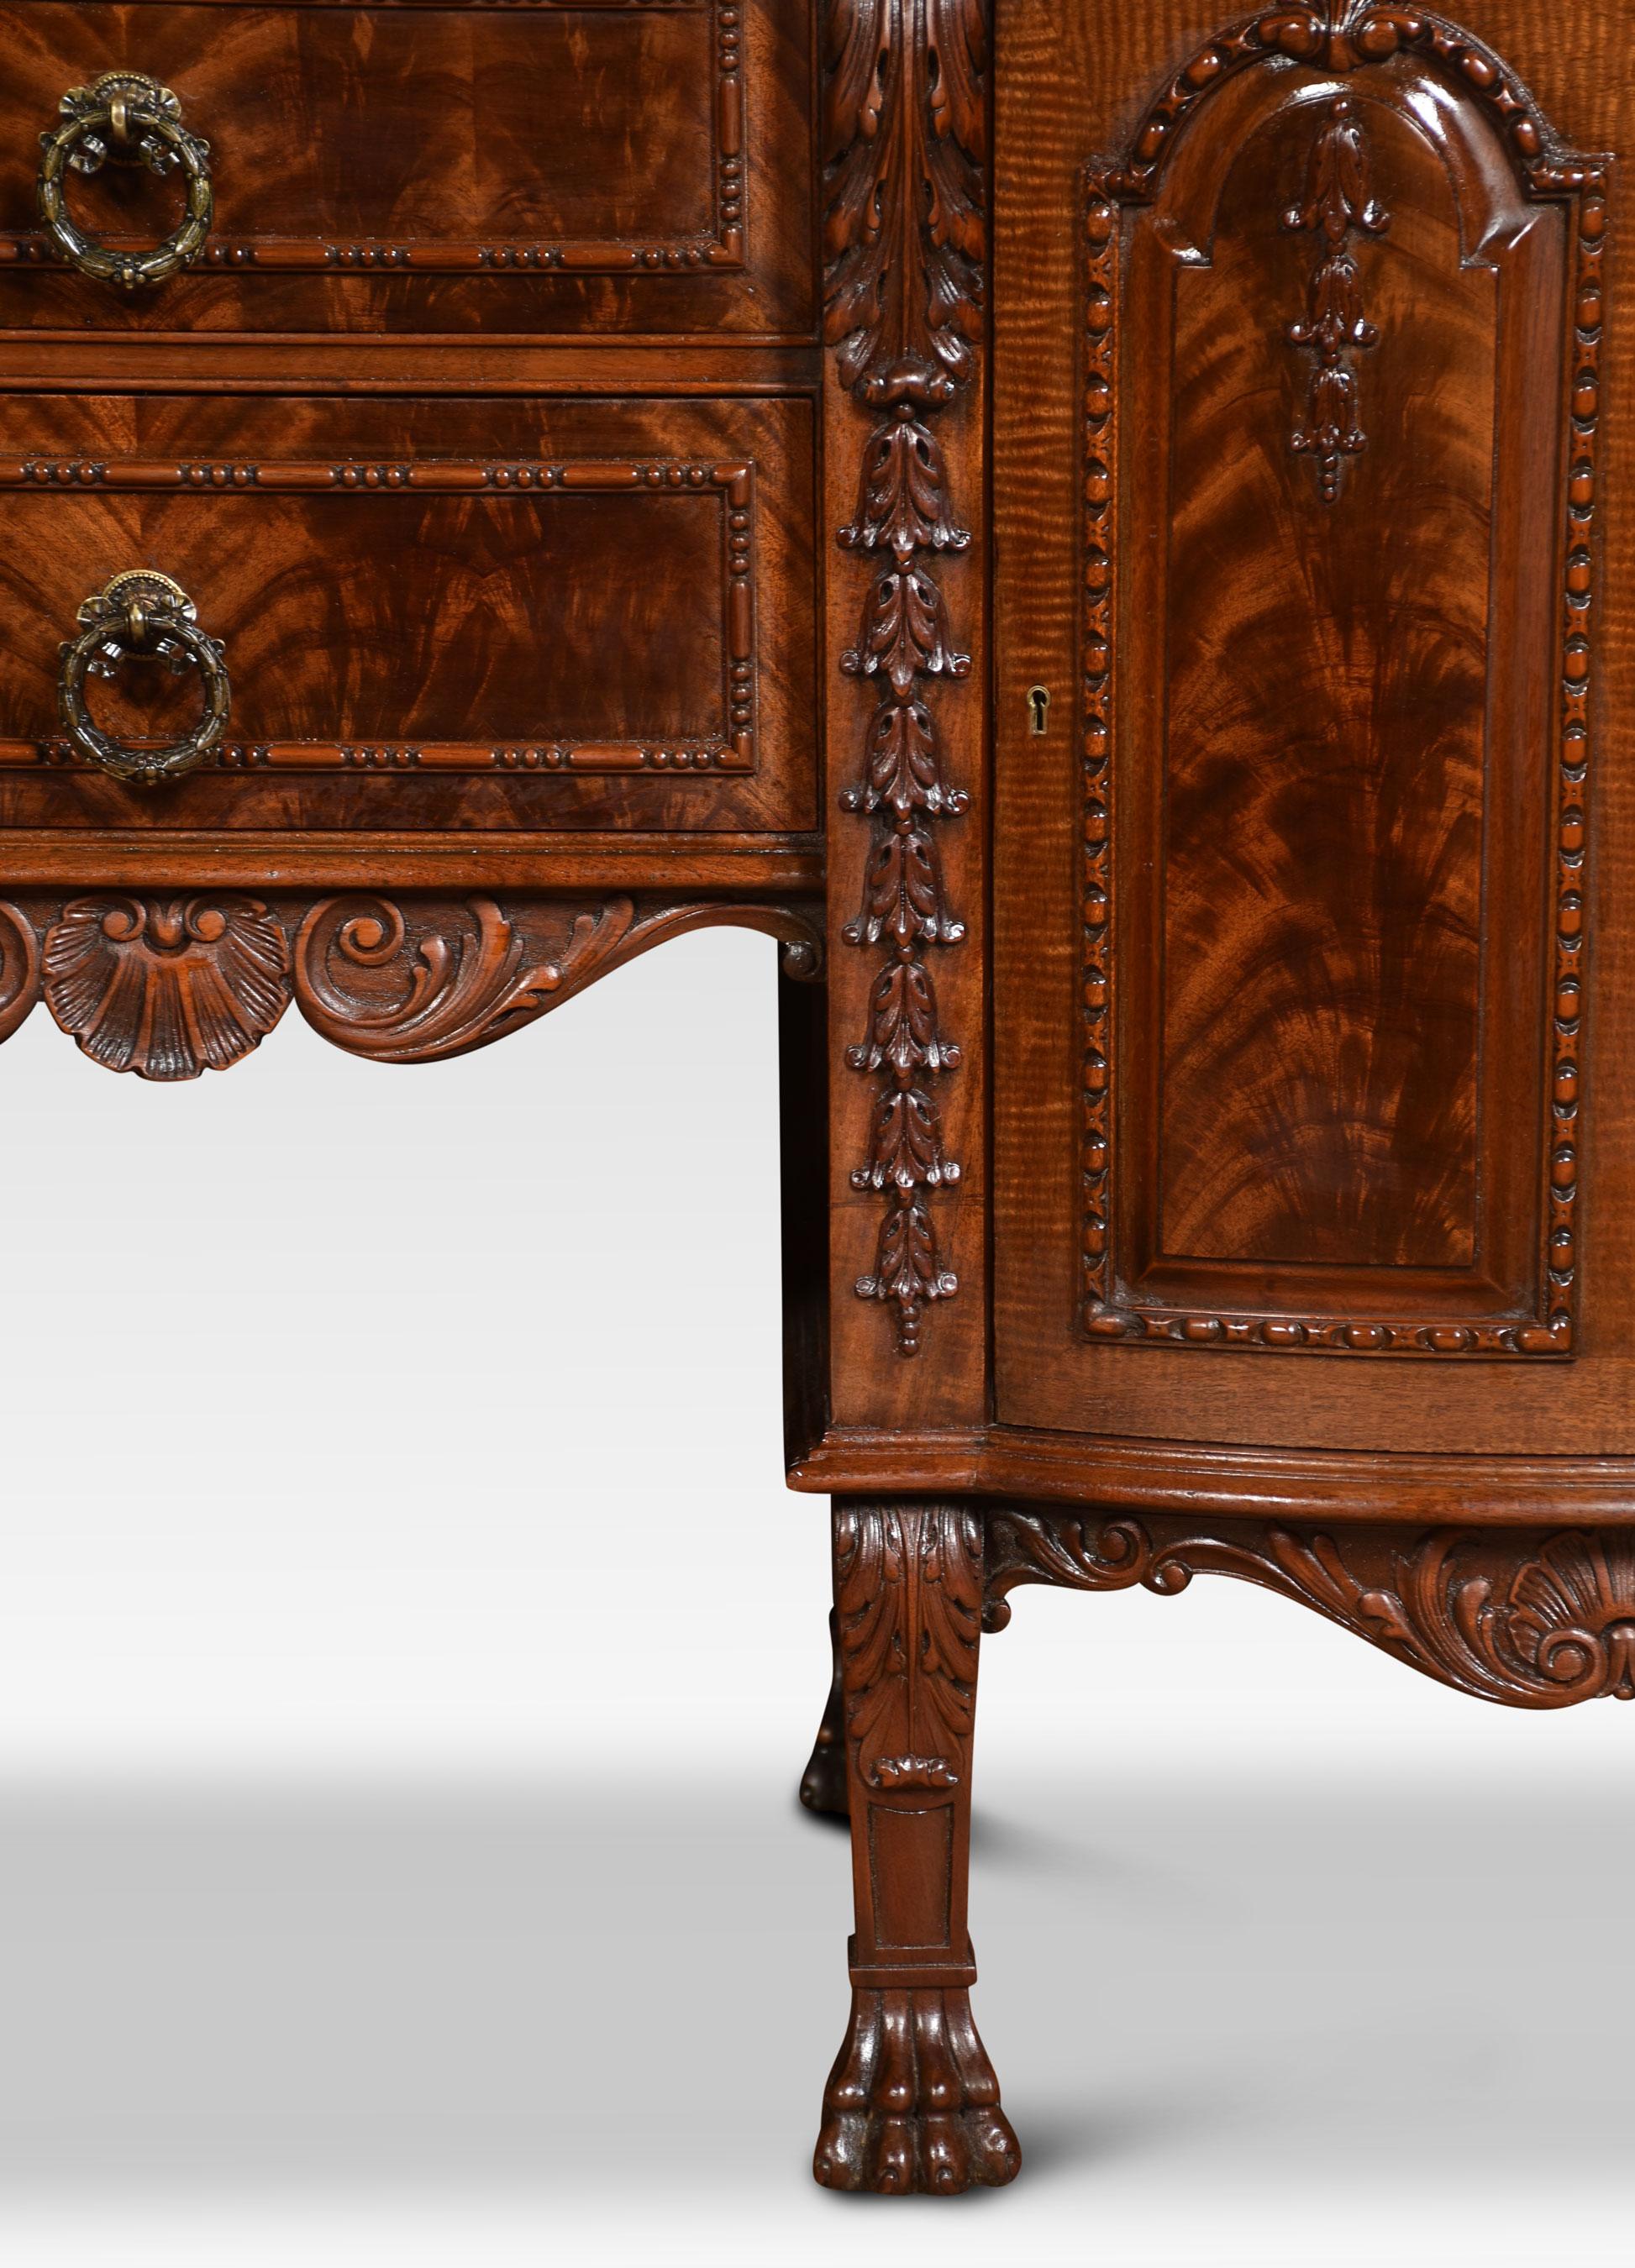 Carved mahogany sideboard the large rectangular inverted breakfront top and molded edge above two central drawers with brass tooled handles flanked by arch panel cupboard doors opening to reveal the fitted interior. All raised up on short legs